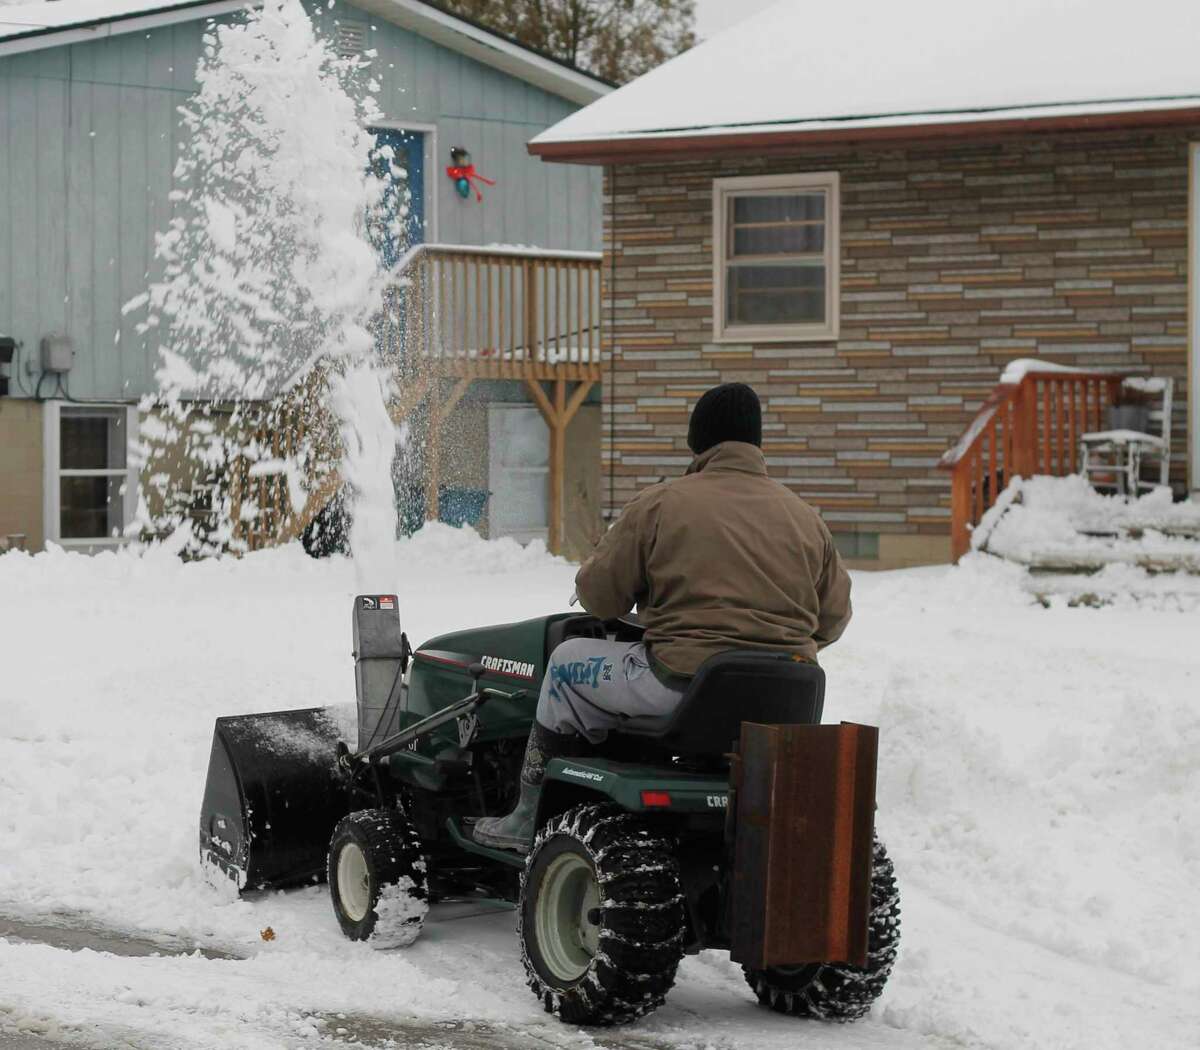 Northern Michigan residents brought out their snow blowers, salt and shovels Wednesday morning following a winter storm which hit the region overnight. (Kyle Kotecki/News Advocate)